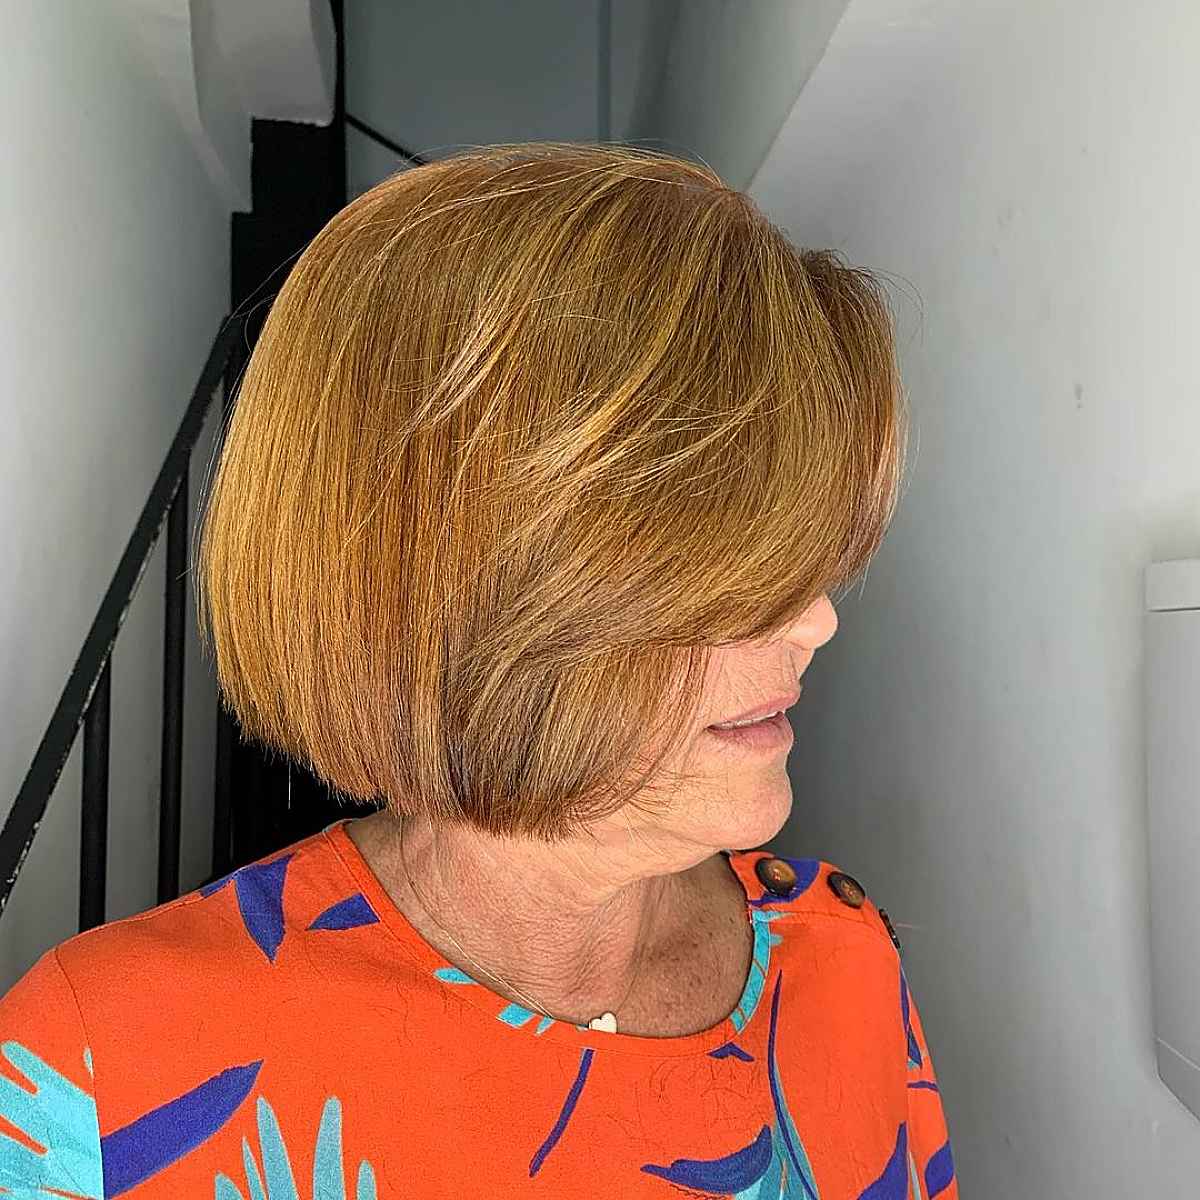 21 Low-Maintenance Hairstyles for 60 Year Old Women with Fine Hair